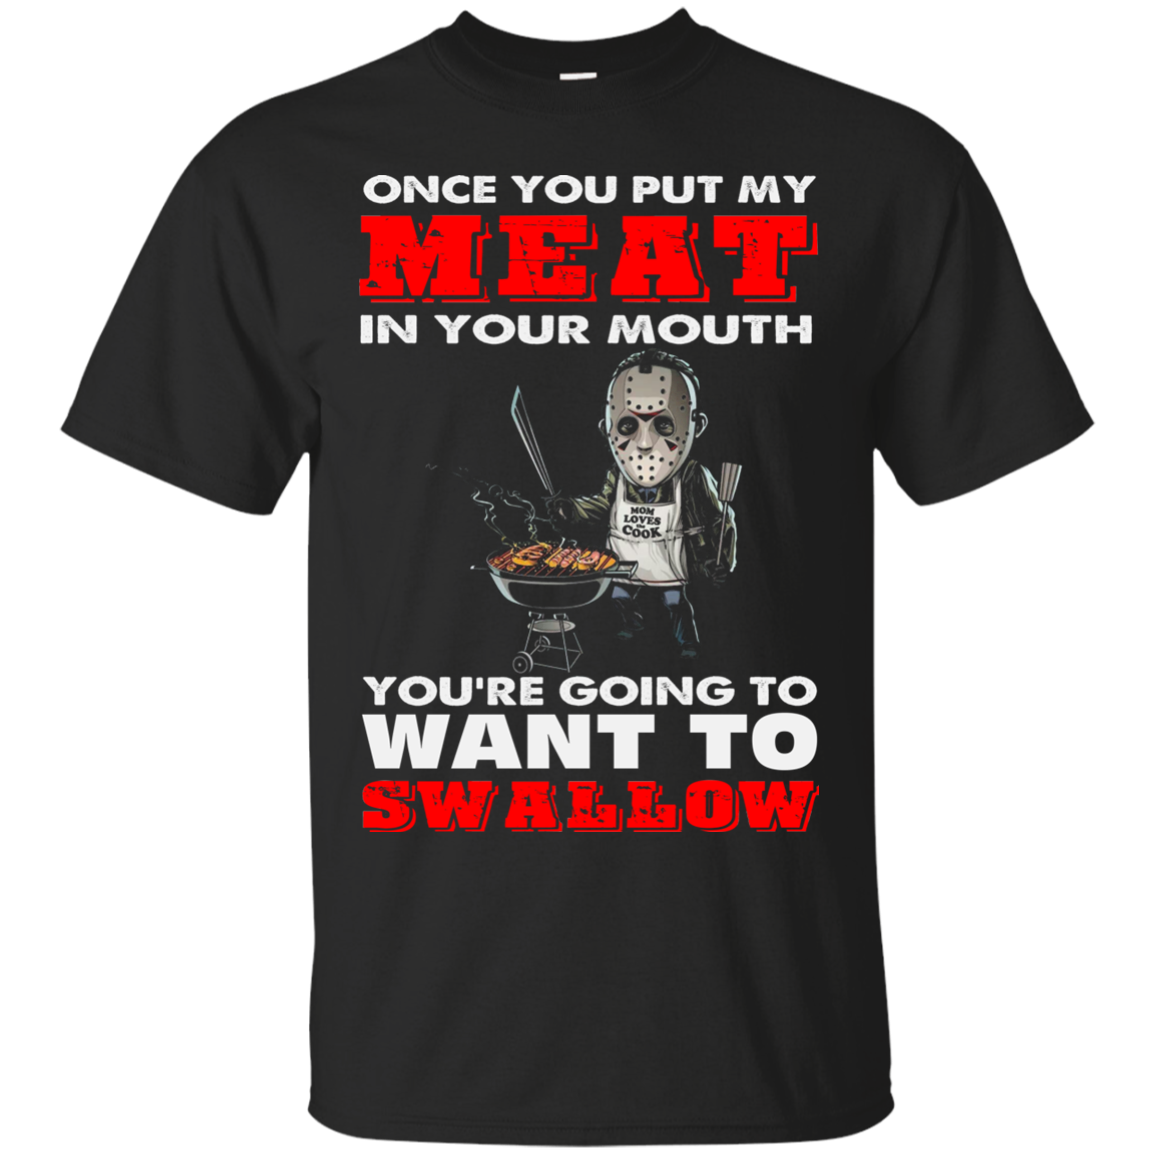 Jason Voorhees: Once you put my meat in your mouth shirt, hoodie, tank